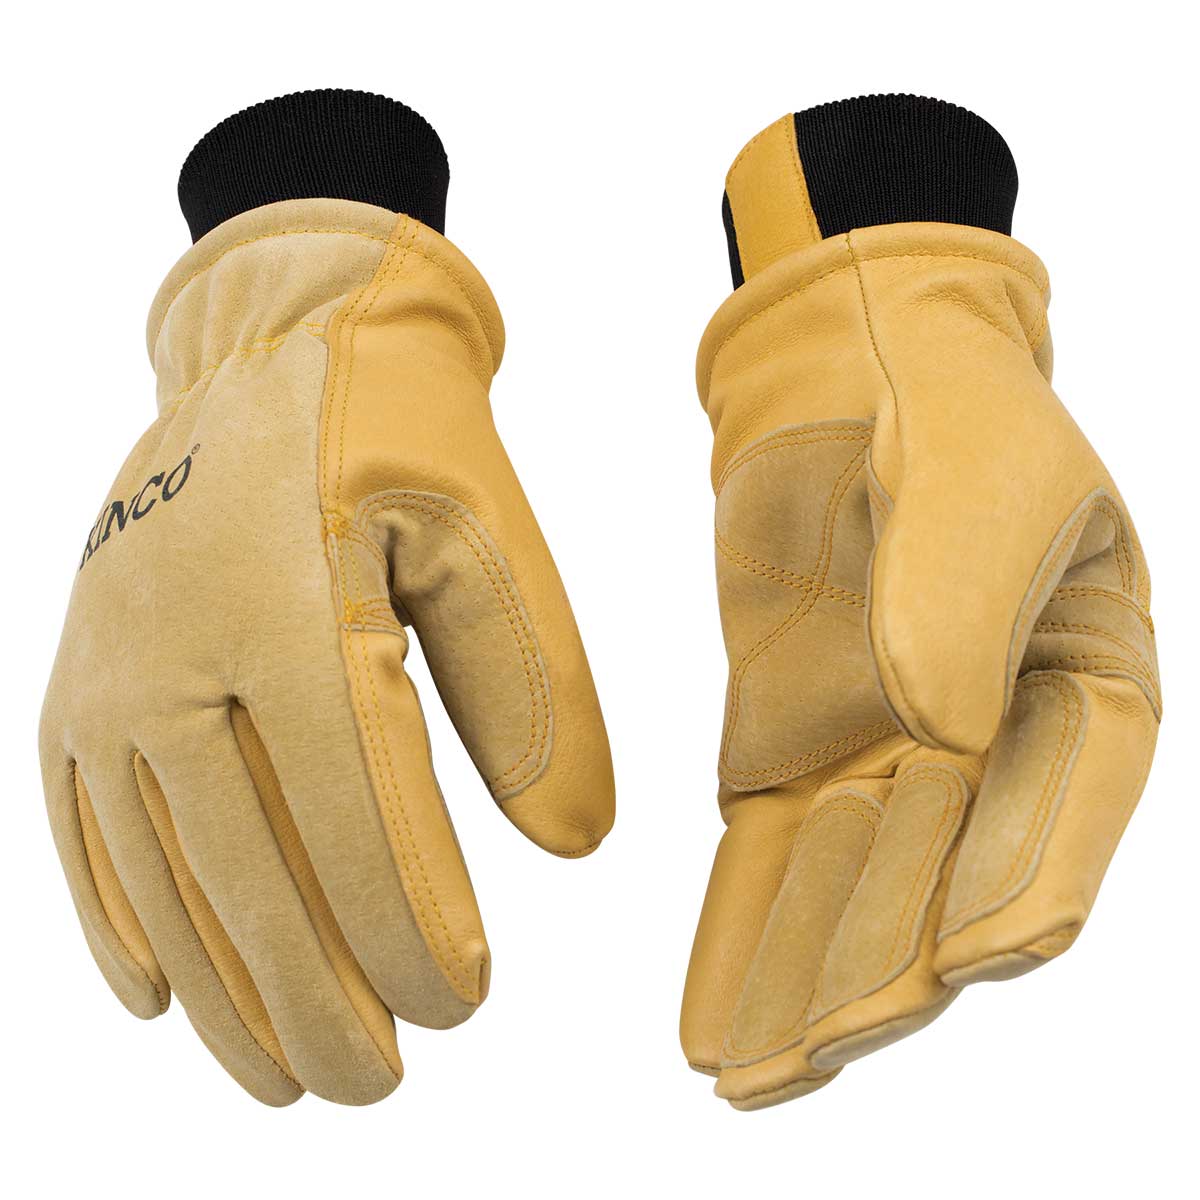 Kinco 901 Insulated Pigskin and Suede Work Gloves